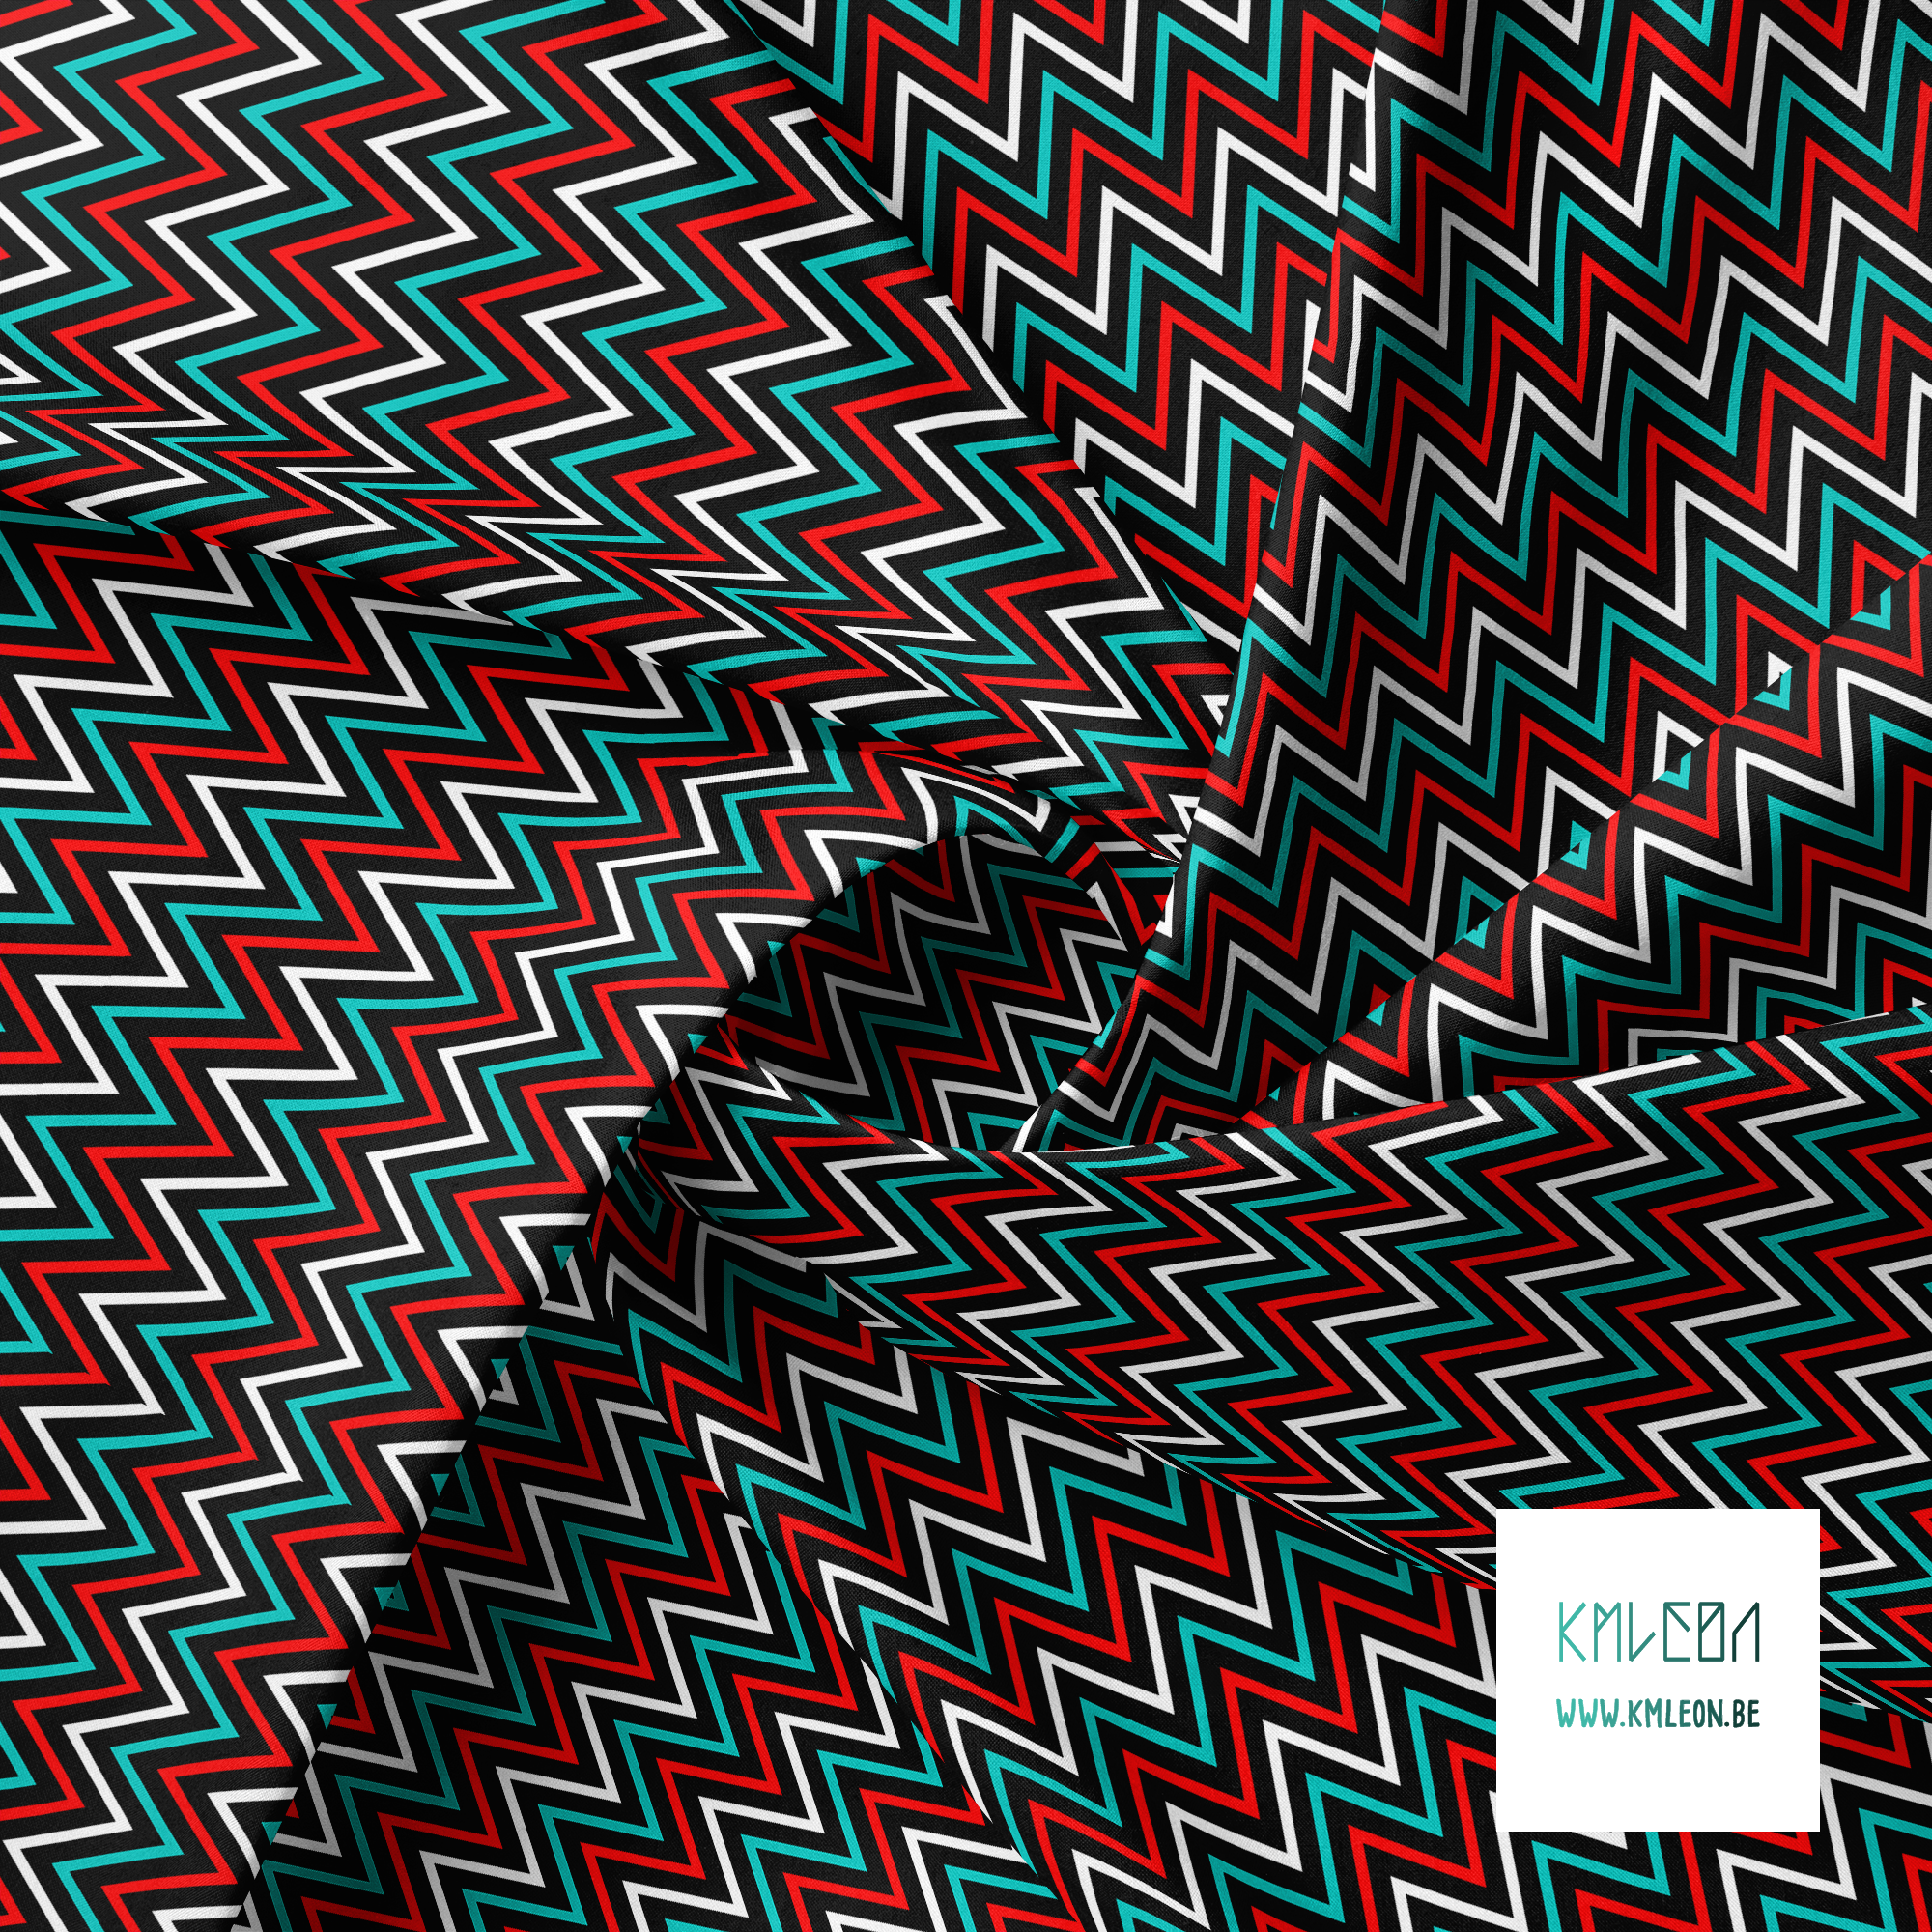 Teal, red and white chevron fabric